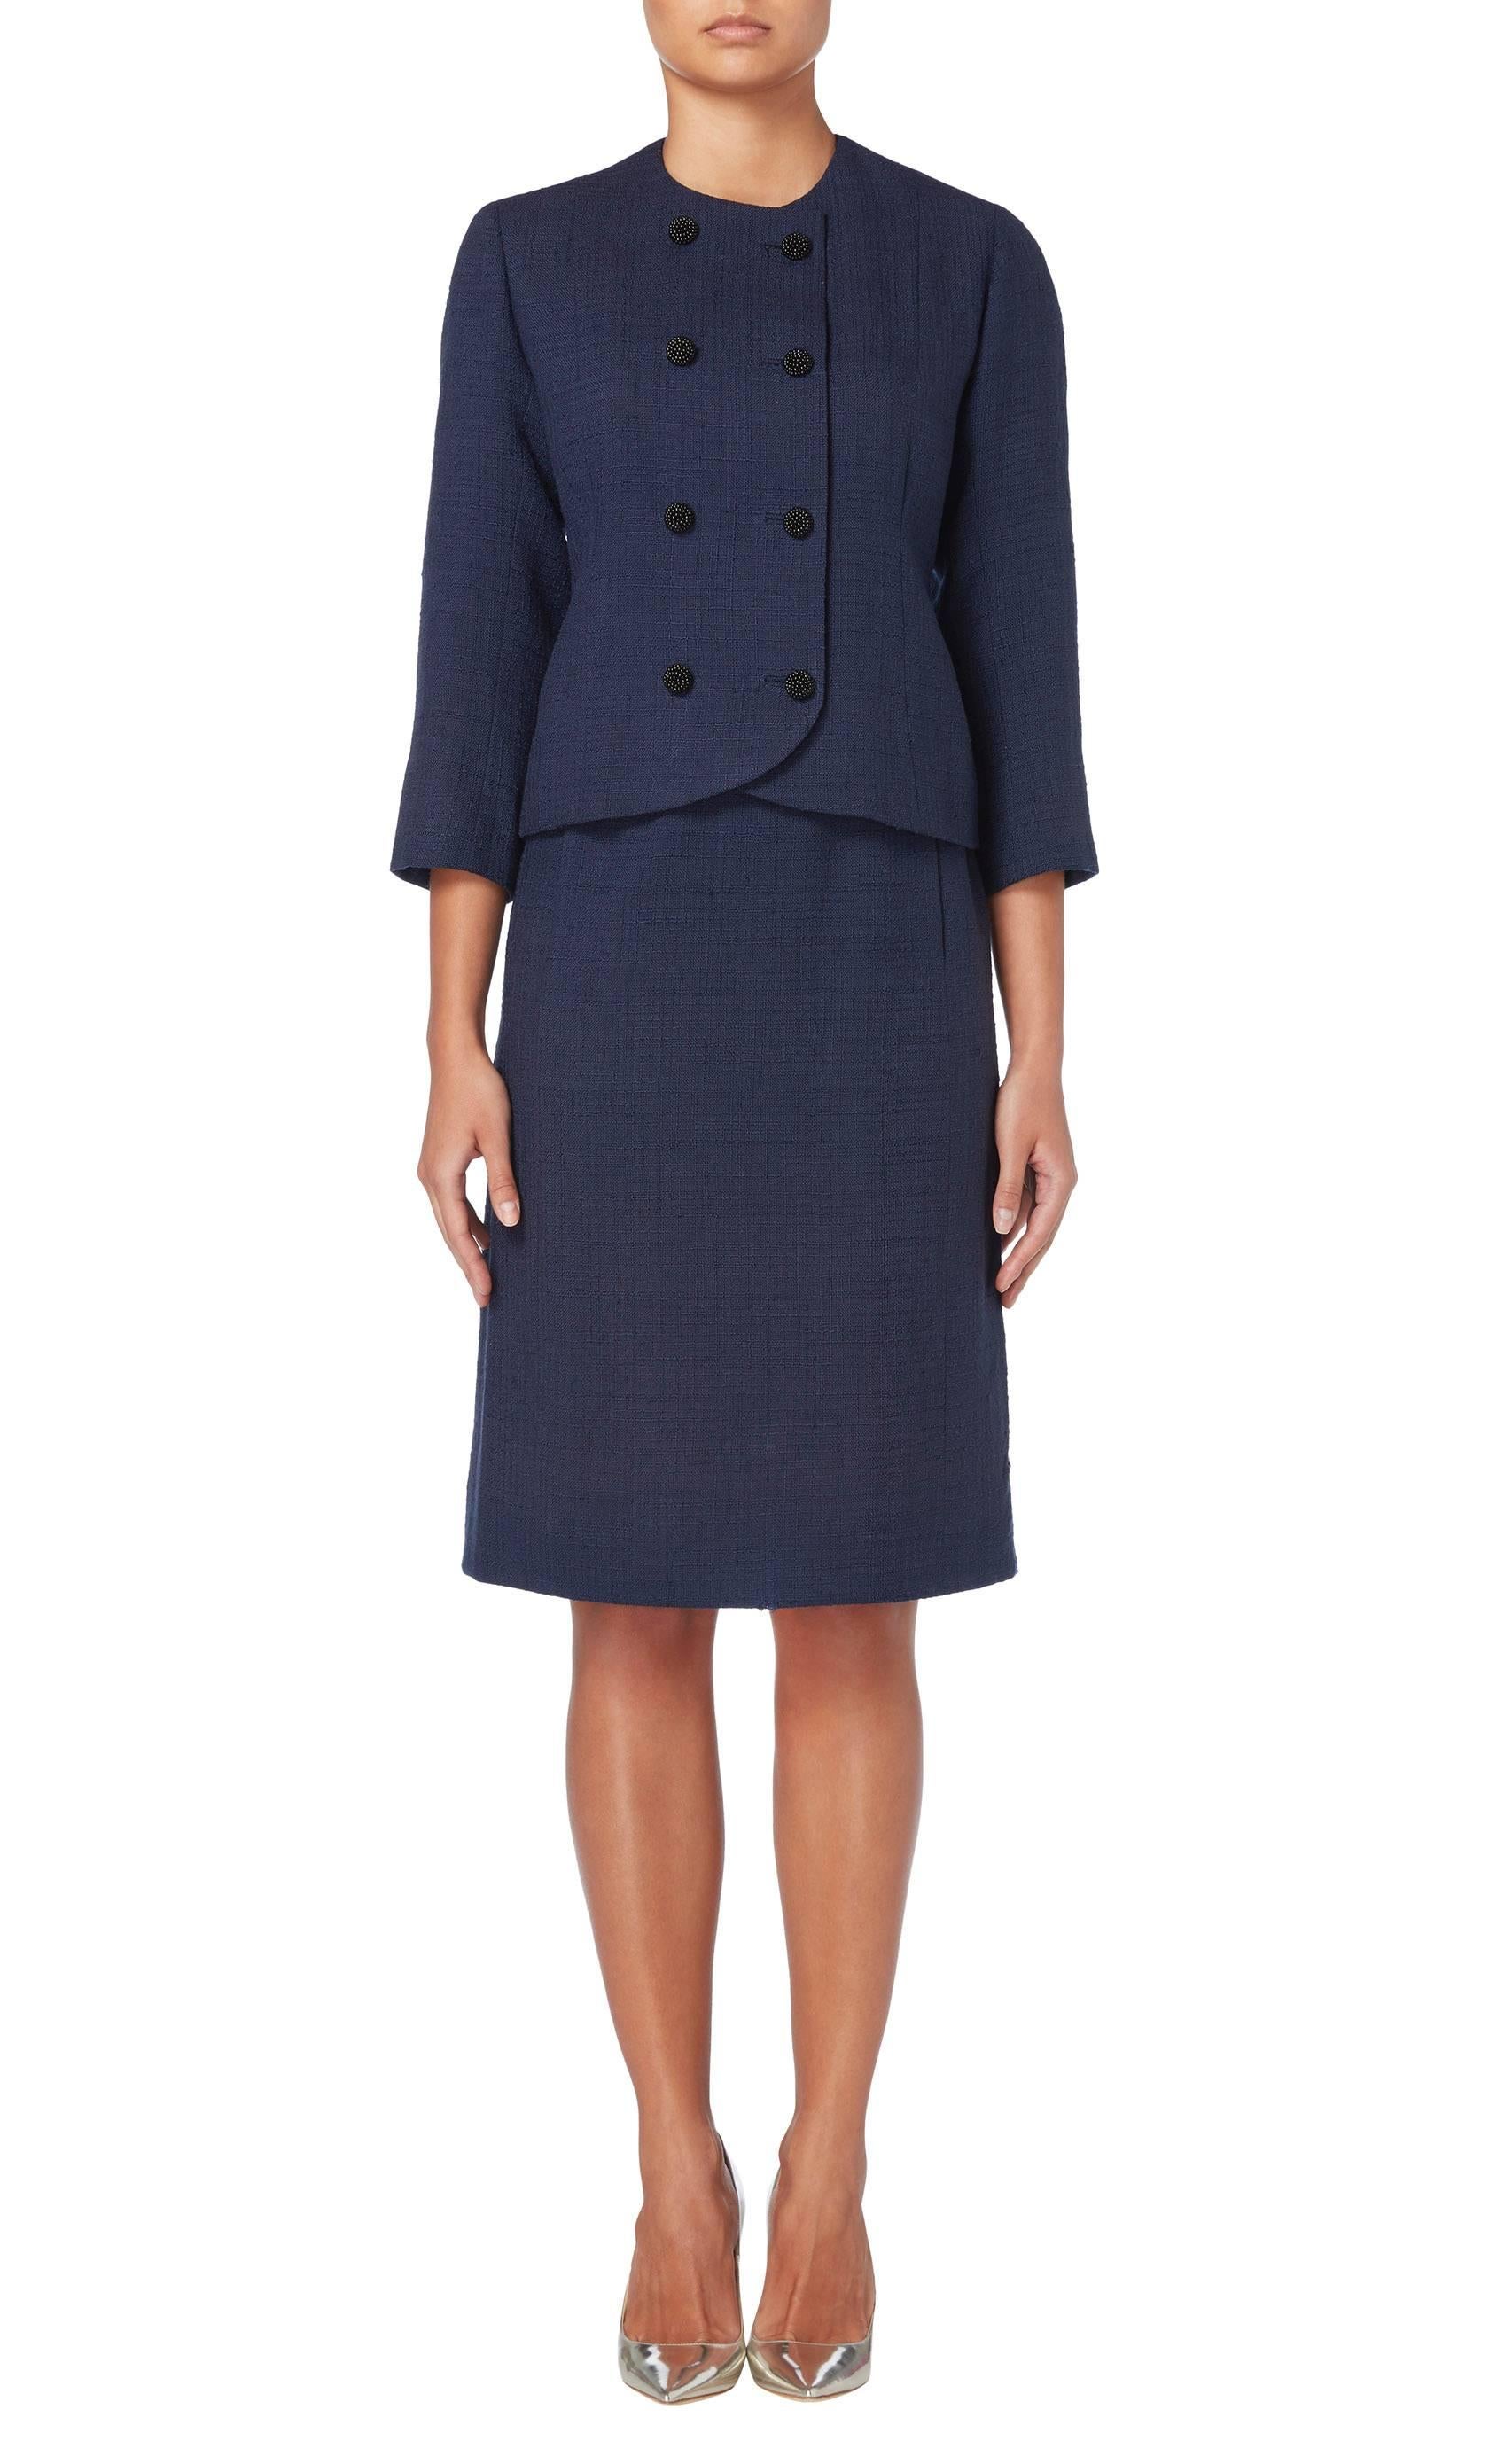 Introduce haute couture into a work wear wardrobe with this chic Balenciaga skirt suit. Constructed in navy wool, the double-breasted jacket fastens to the front with black beaded buttons and features a round neckline and three-quarter length